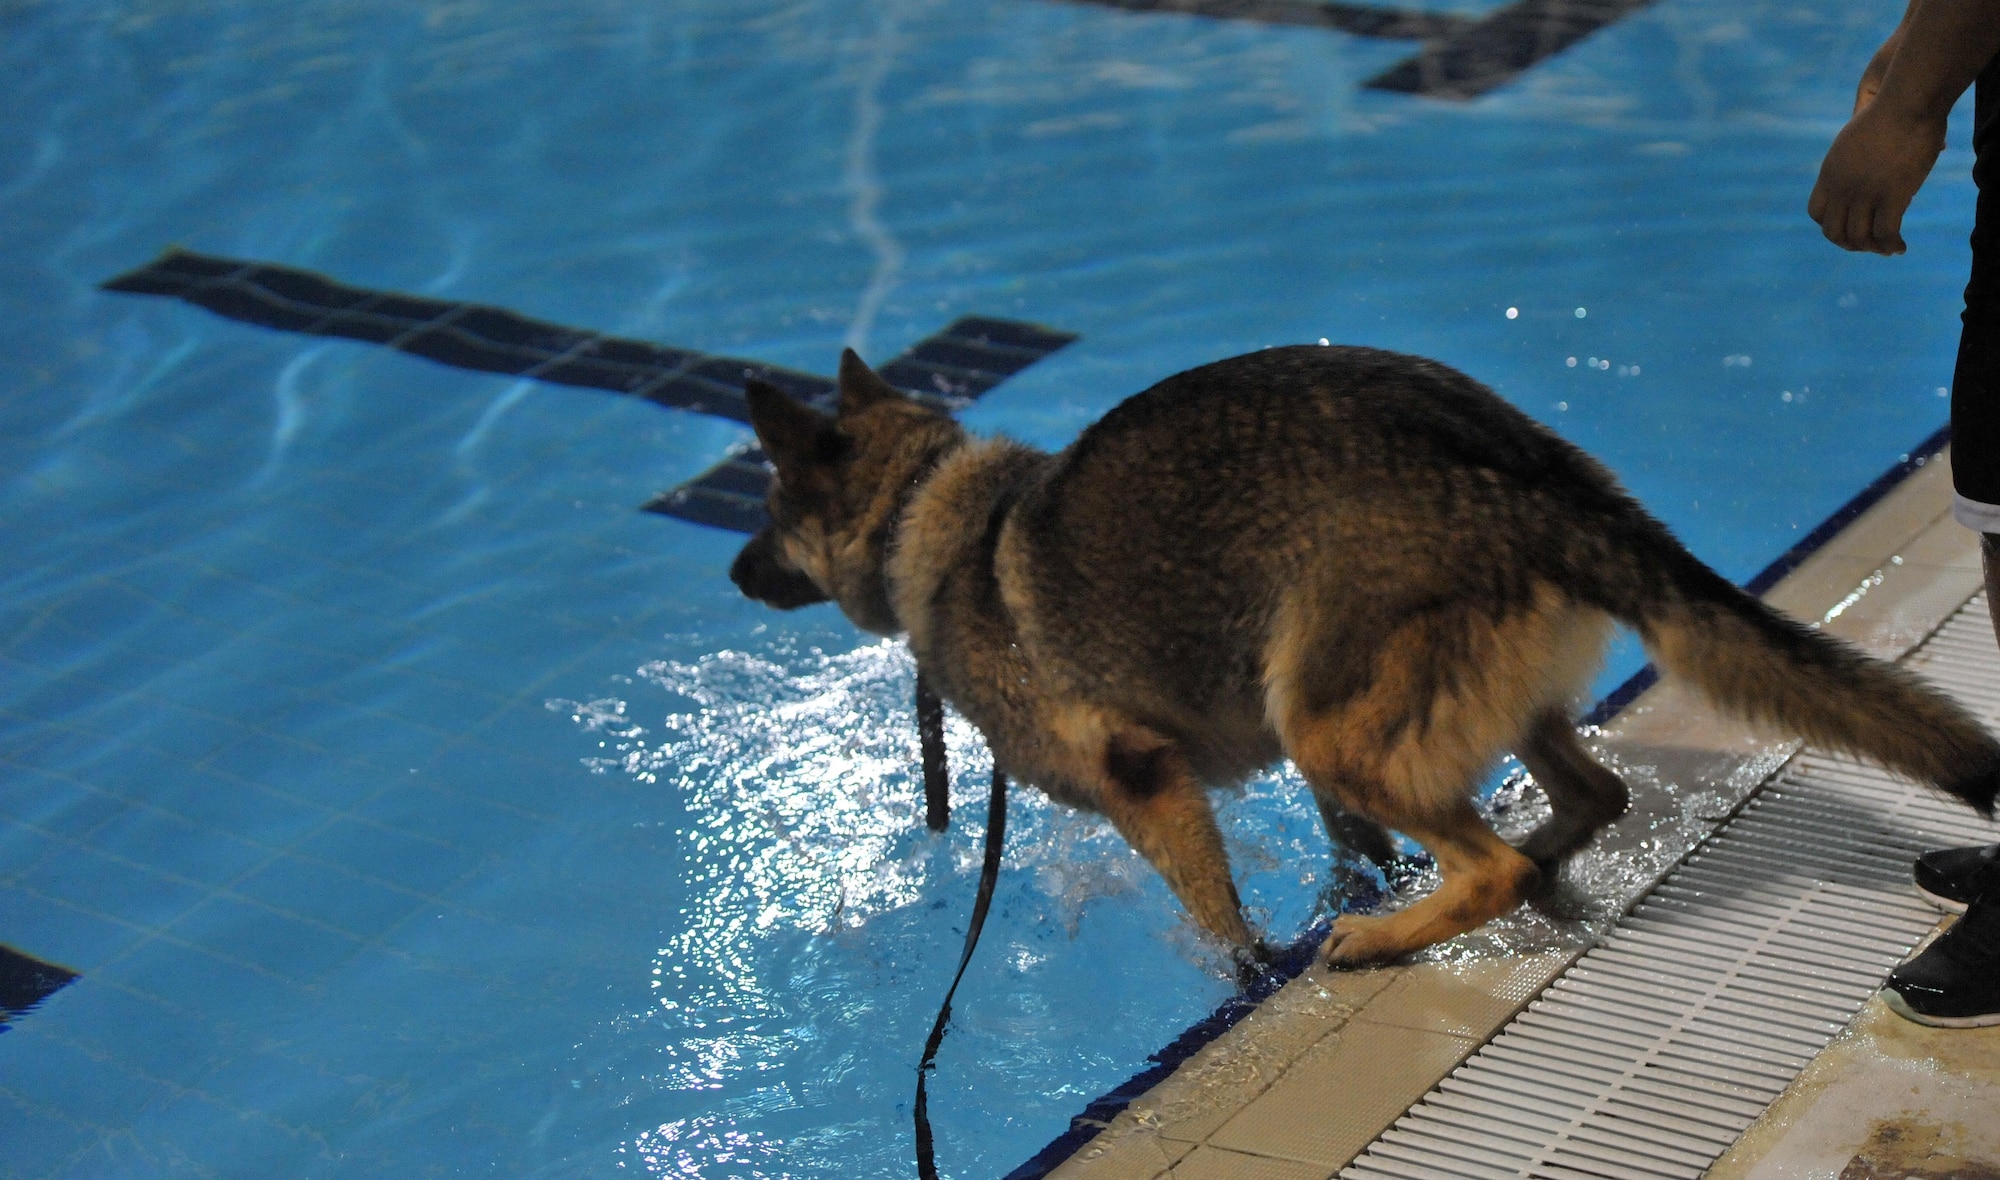 Satie, 380th Expeditionary Security Forces Squadron military working dog, age four, prepares to leap from the edge of a pool during annual water-based aggression training at the base pool at undisclosed location in Southwest Asia, Jan. 18, 2016. Older, more experienced military working dogs dogs were more proactive in their approach to the training, immediately seeking out the aggressor upon entering the pool area. (U.S. Air Force photo by Staff Sgt. Kentavist P. Brackin/released)